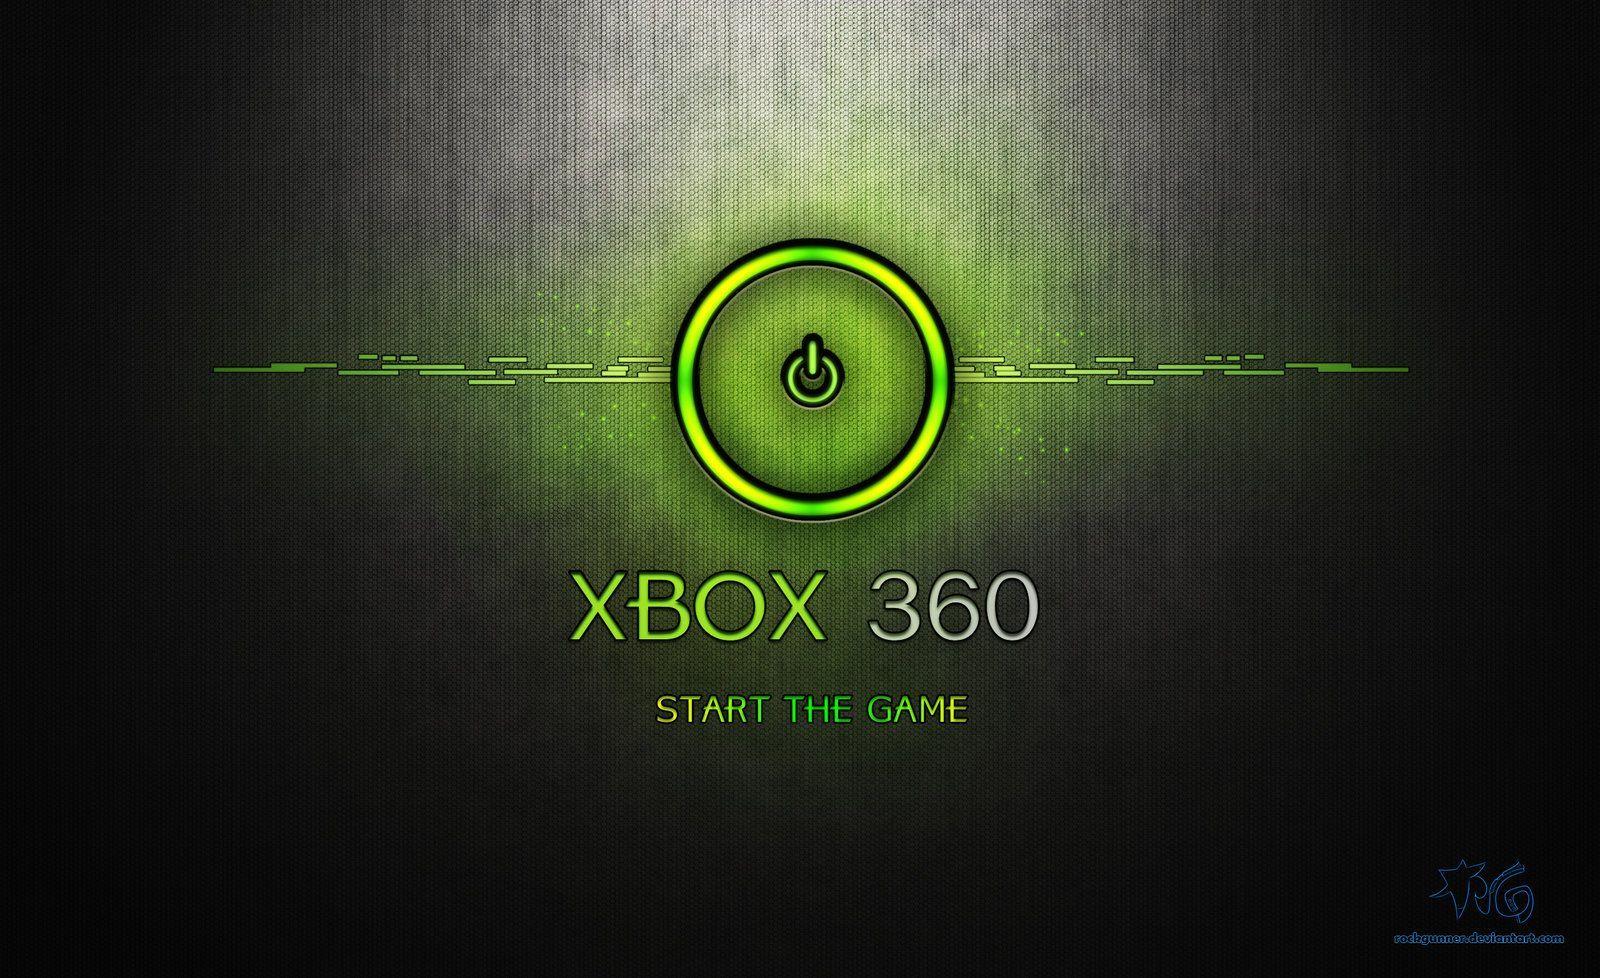 xbox 360 wallpaper. XBox 360 Wallpaper by ROCKGUNNER. Recipes to